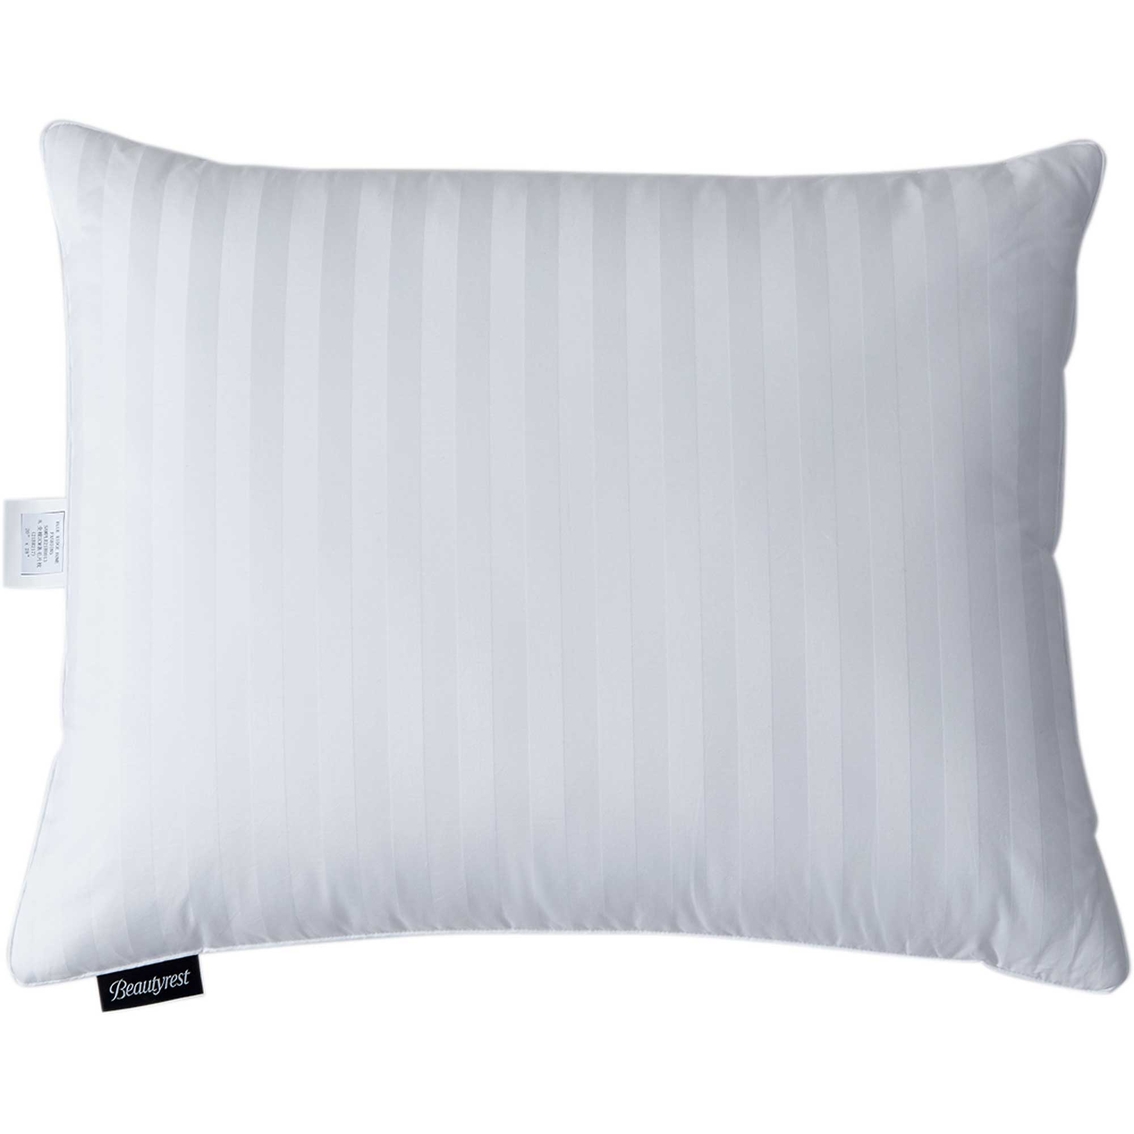 Beautyrest Cotton Softy Around 95/5 Goose Feather/Down Medium Firm Pillow 2 pk. - Image 2 of 4